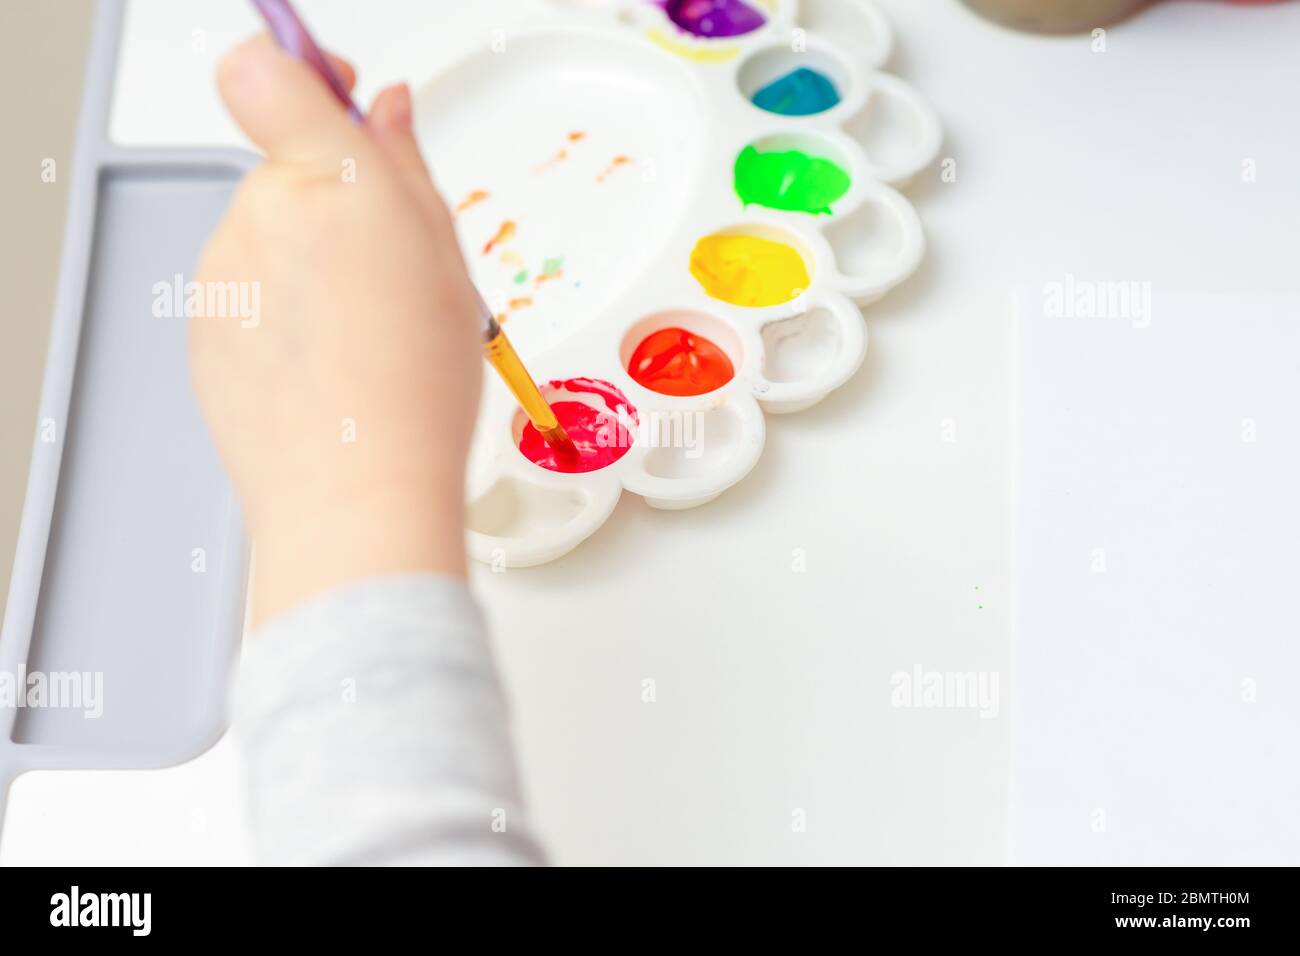 The child is ready to paint with watercolors. Child's hand holding brush over palette on blank sheet of white paper with watercolors. Stock Photo